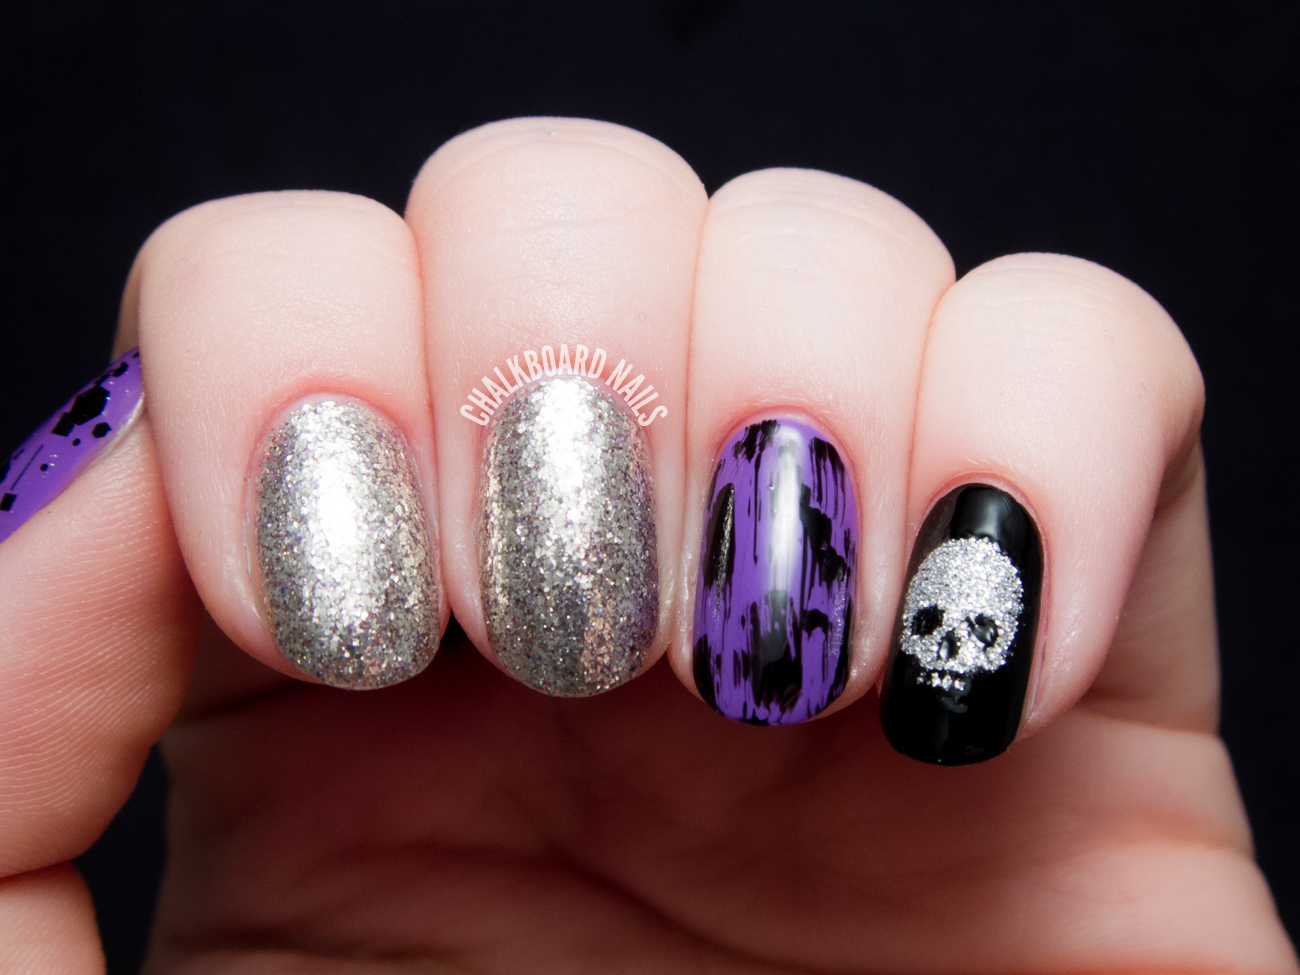 Punk Rock Inspired Nail Designs - wide 10